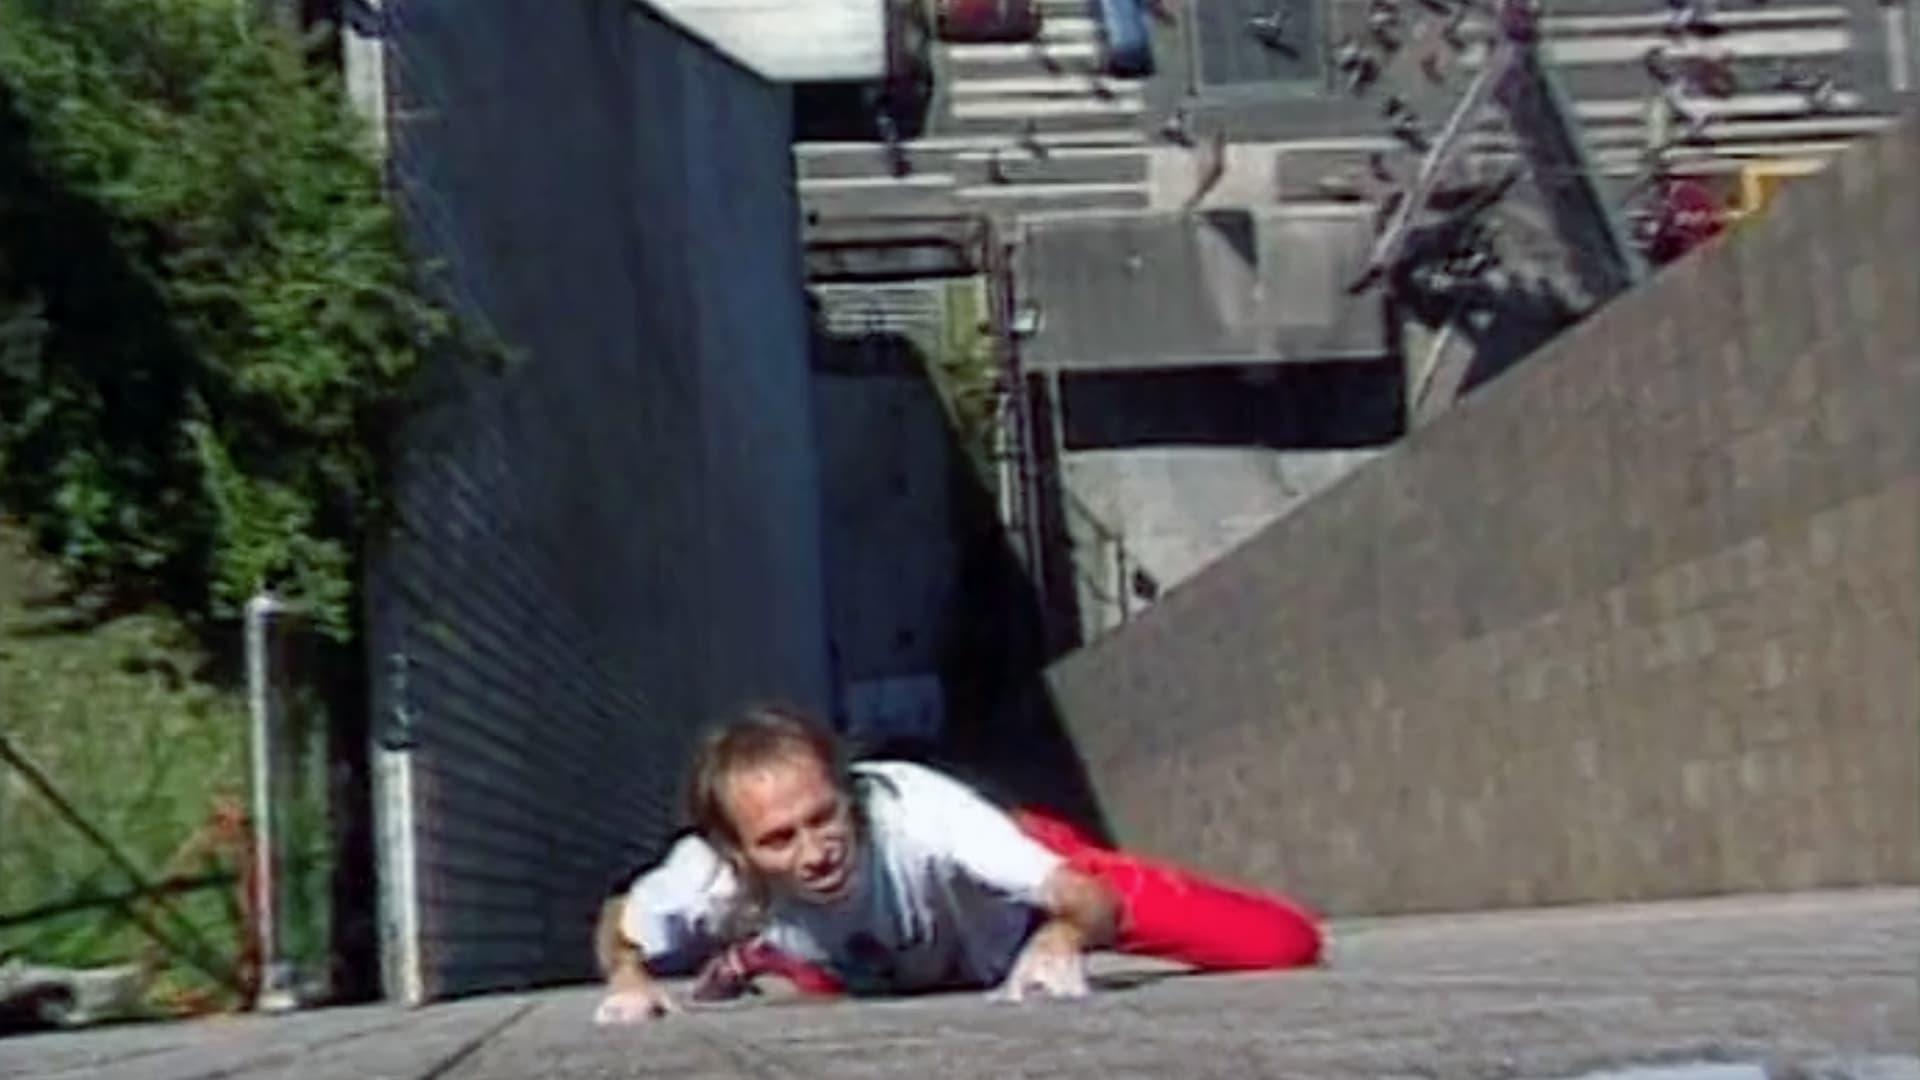 The Wall Crawler: The Verticle Adventures of Alain Robert backdrop